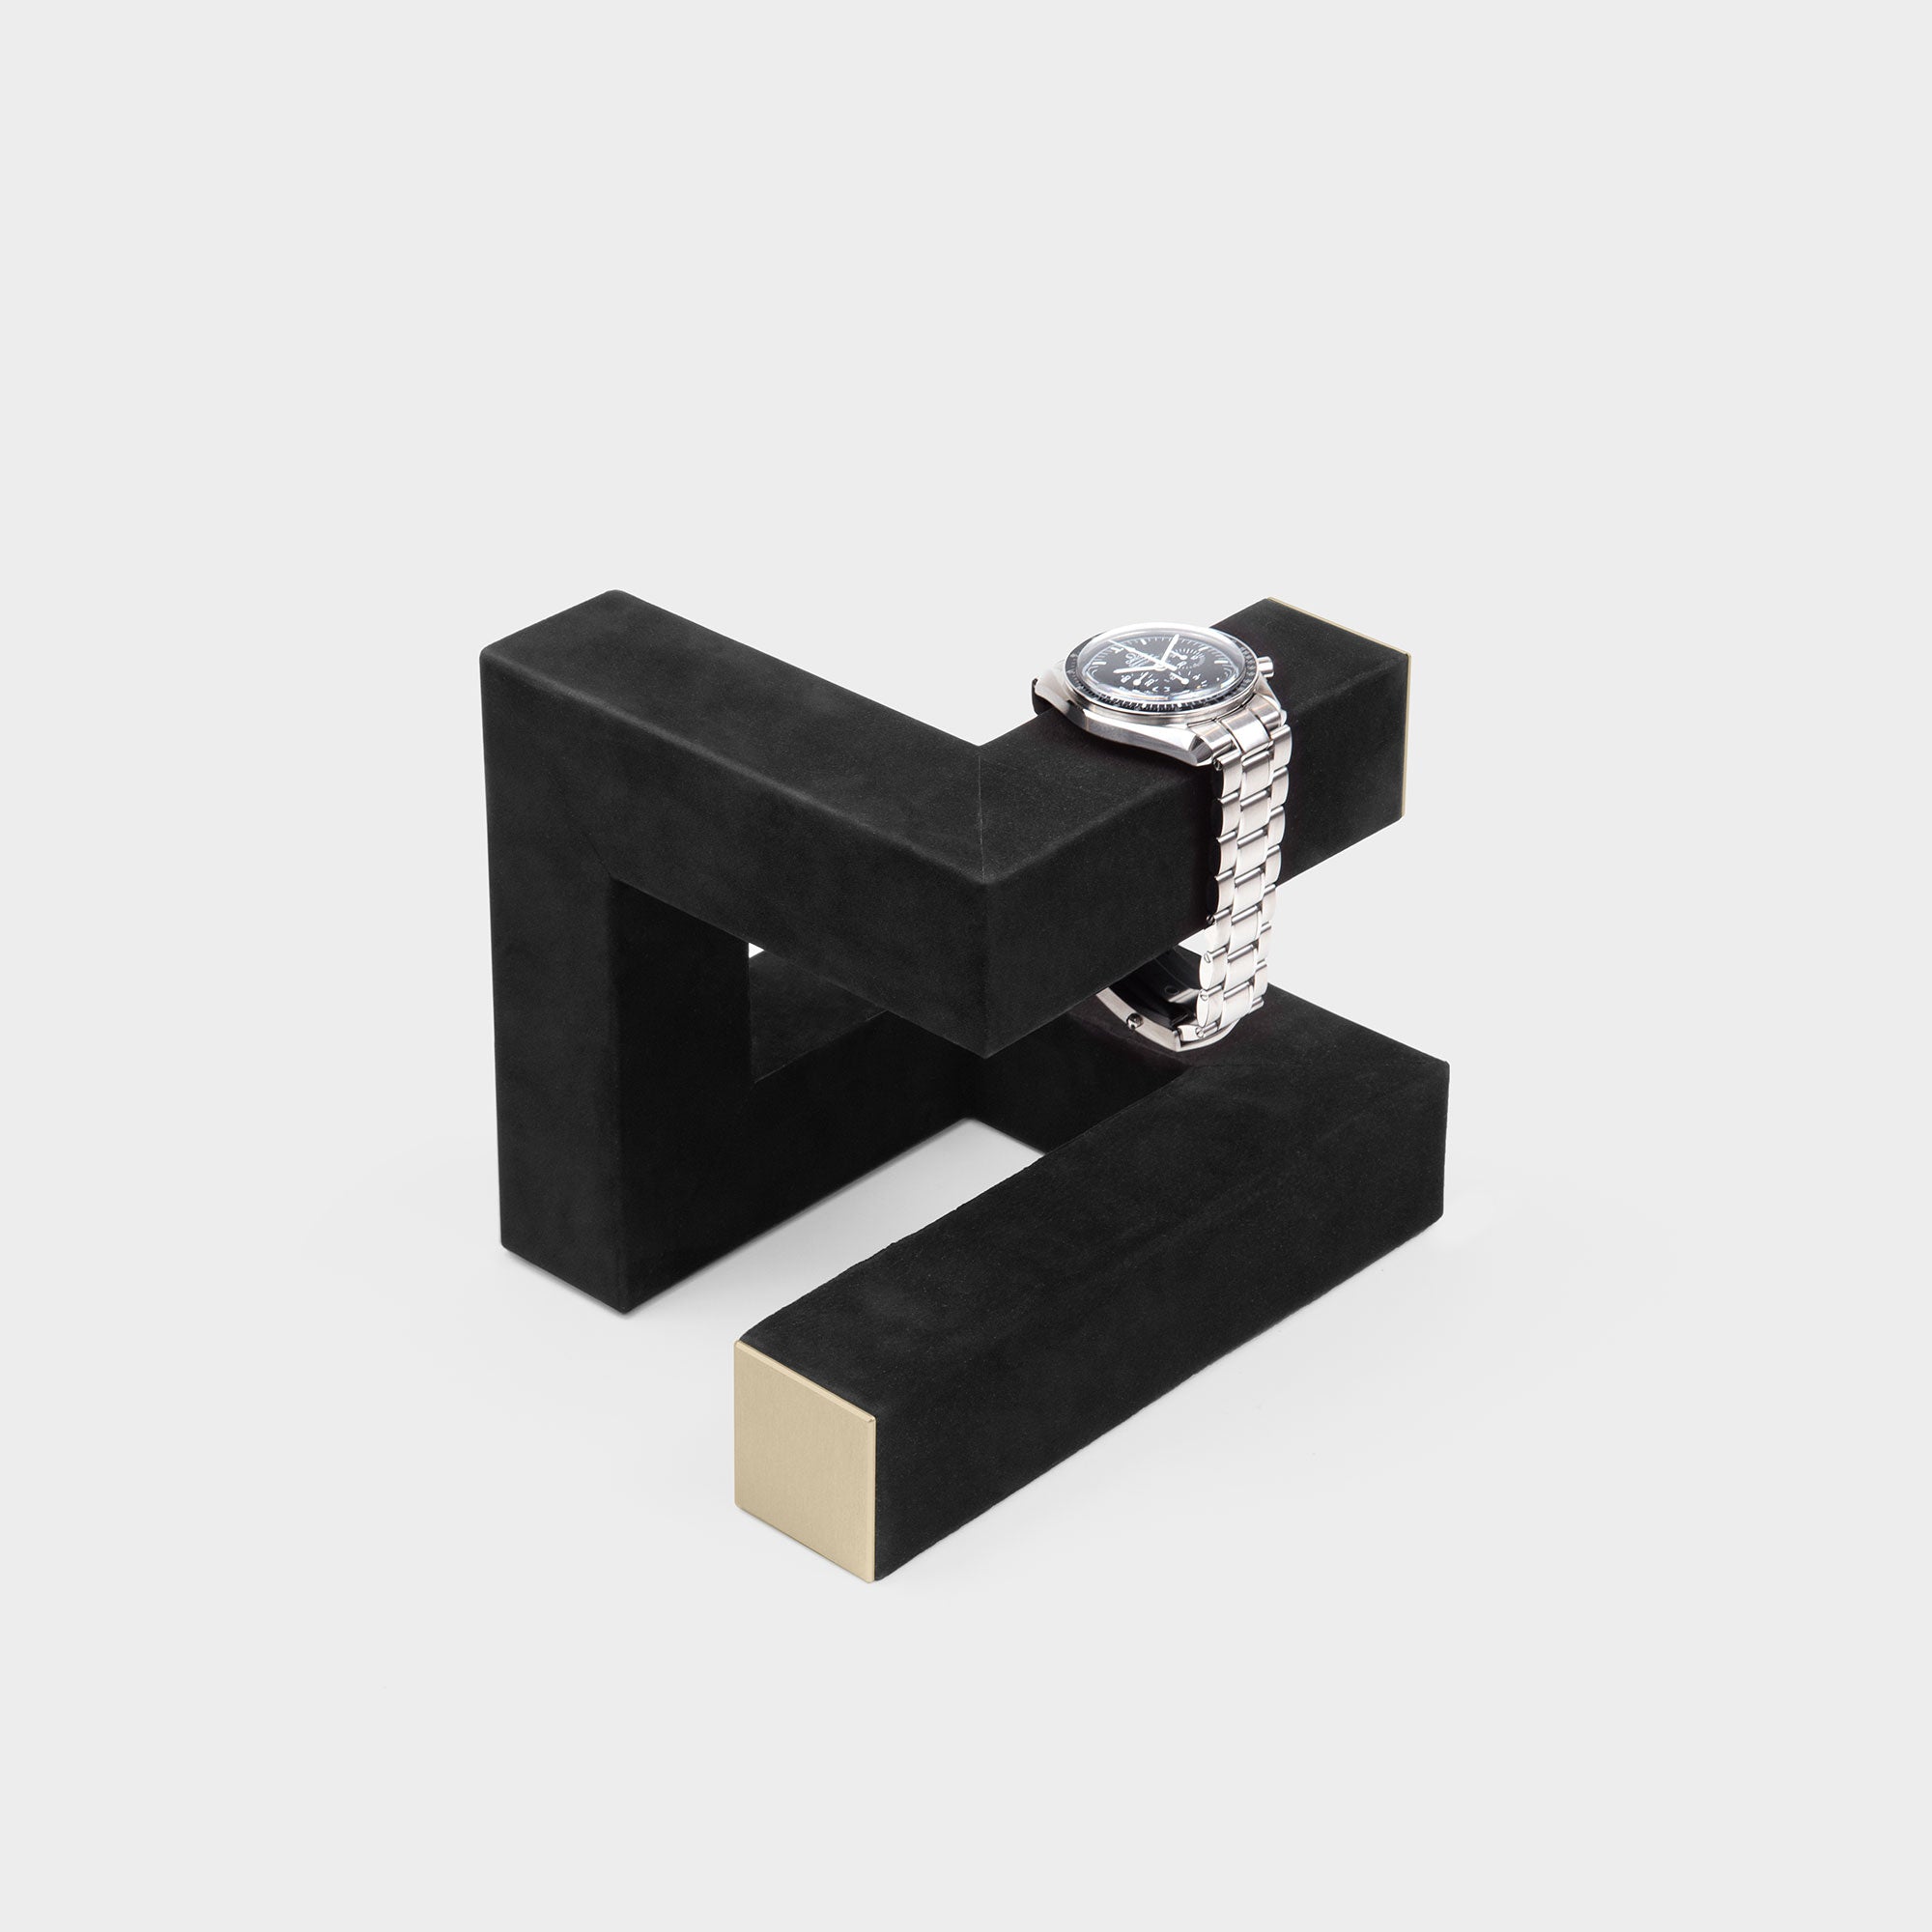 Product photo of Hudson 3 Watch stand in gold displaying one watch